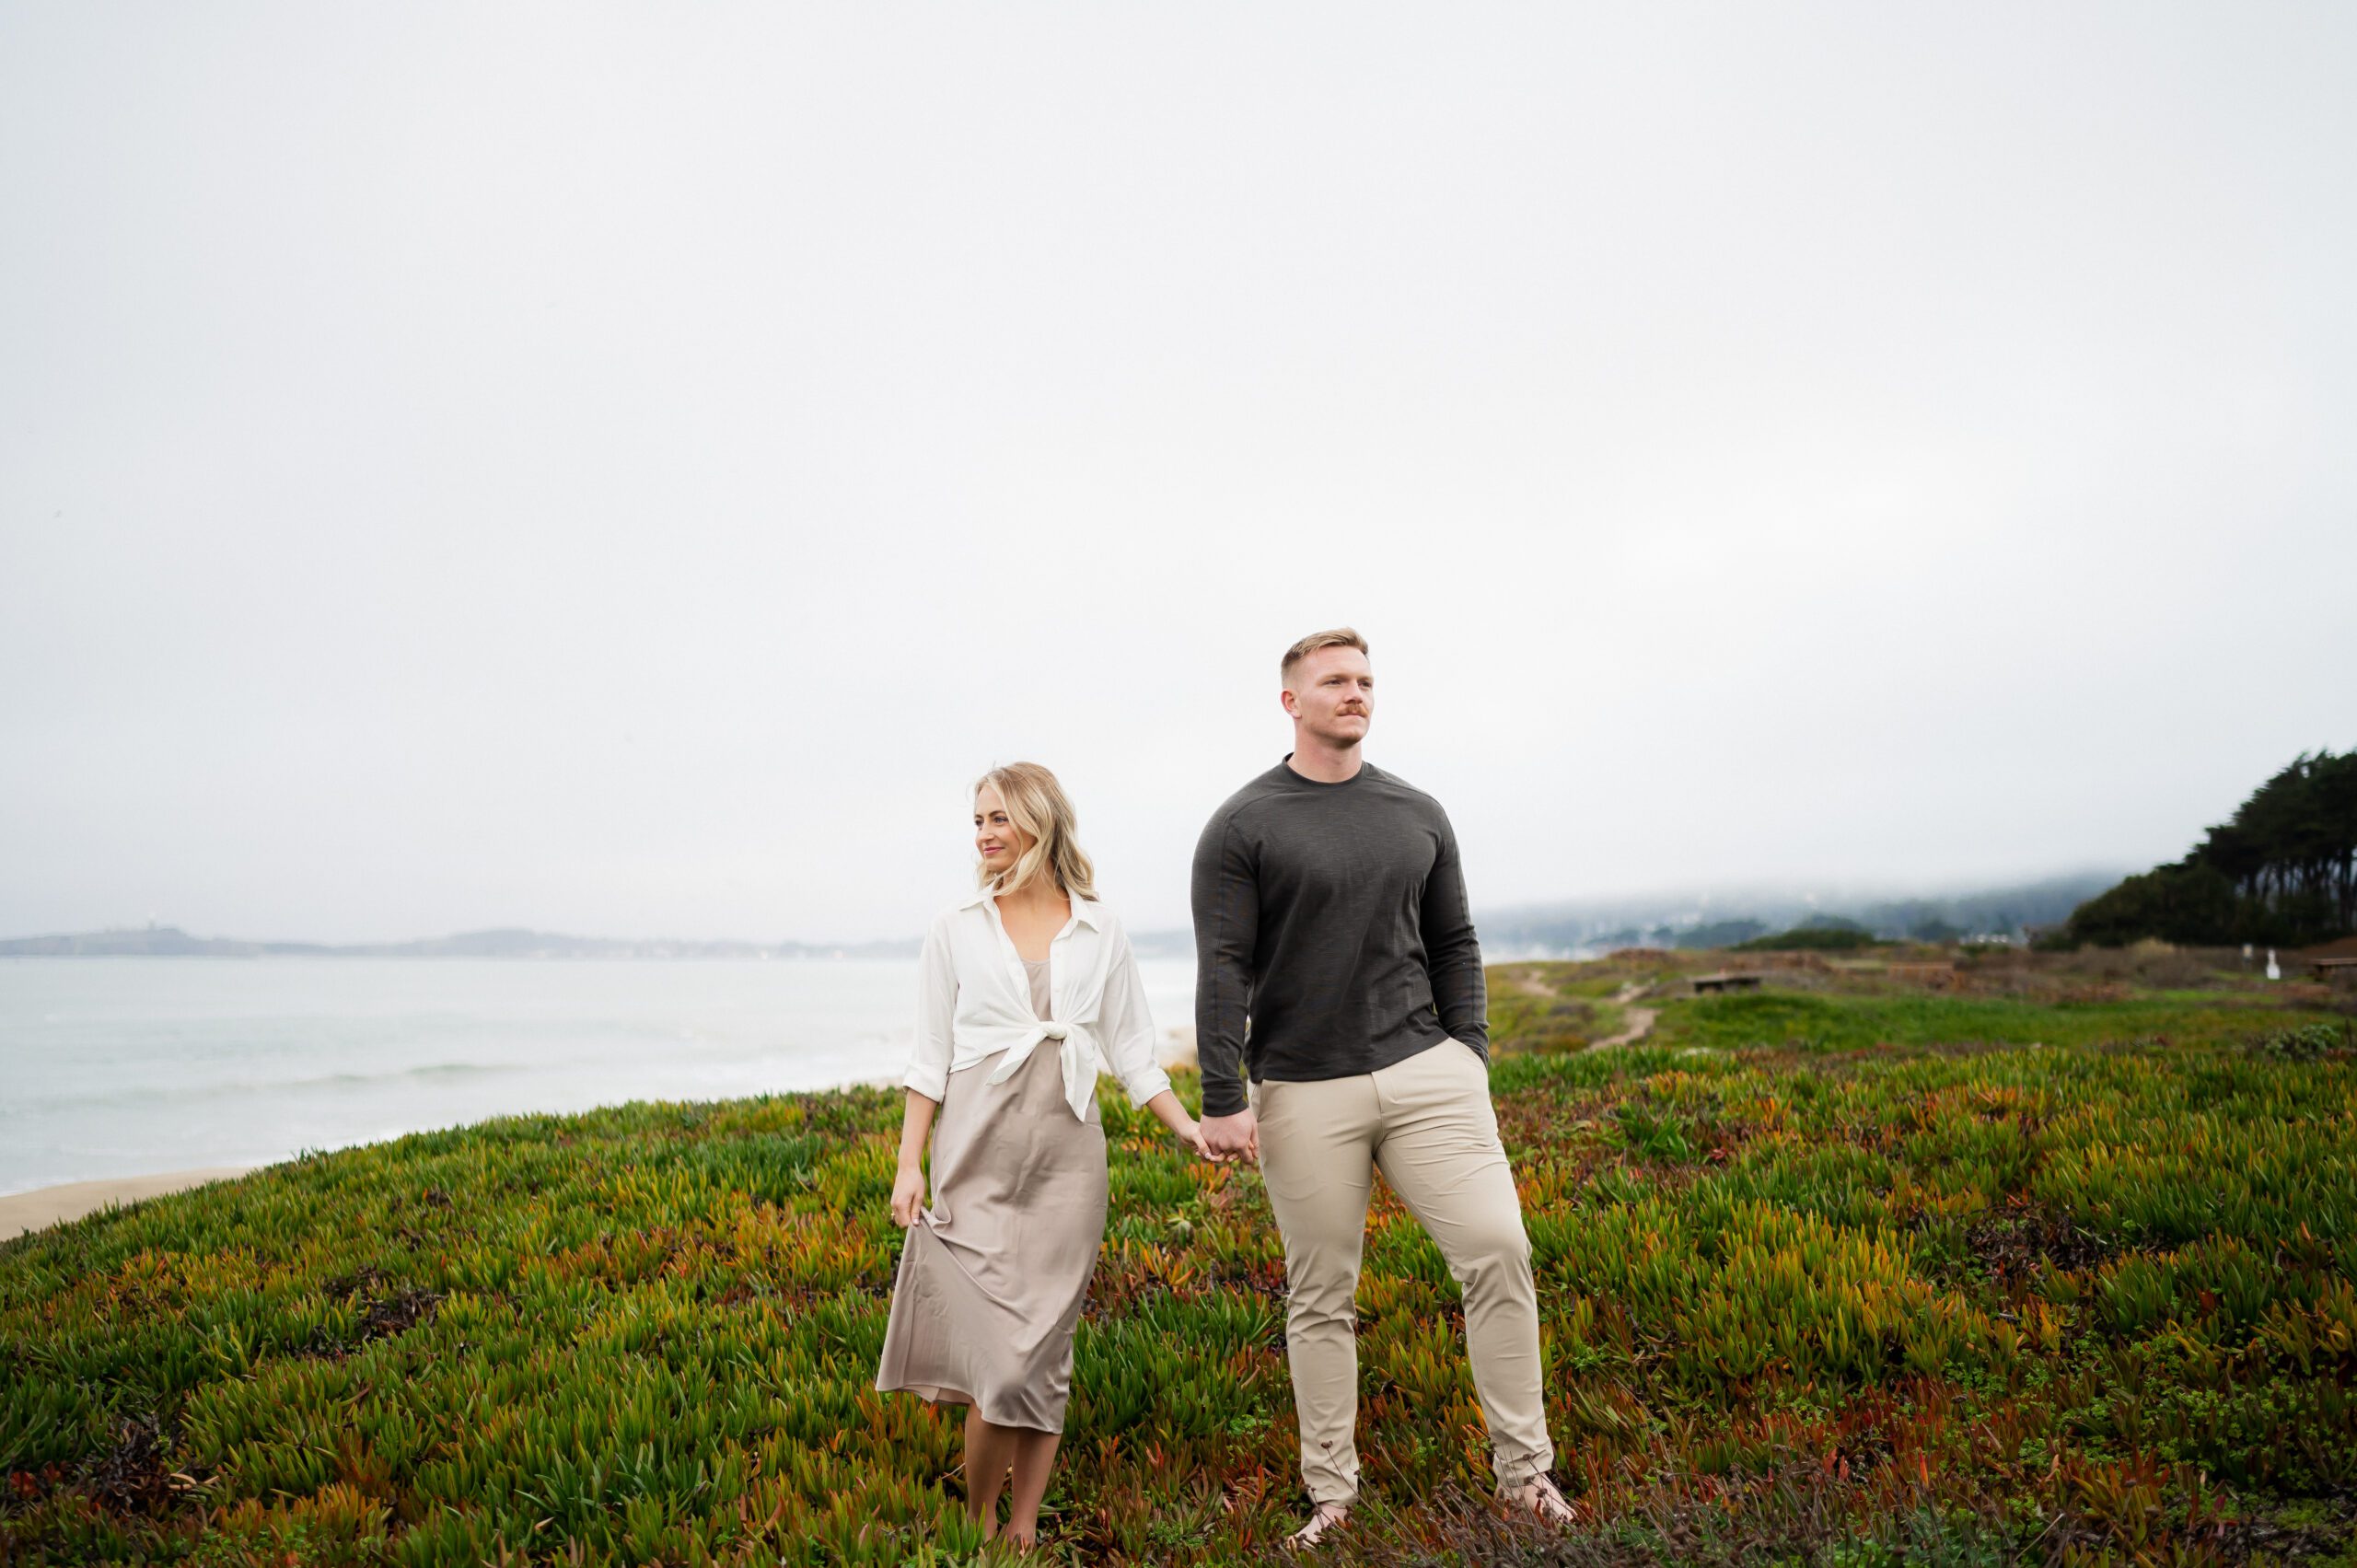 Engaged couple pose casually barefoot for engagement photoshoot in Half Moon Bay, San Francisco, California with destination wedding photographer and videographer team.